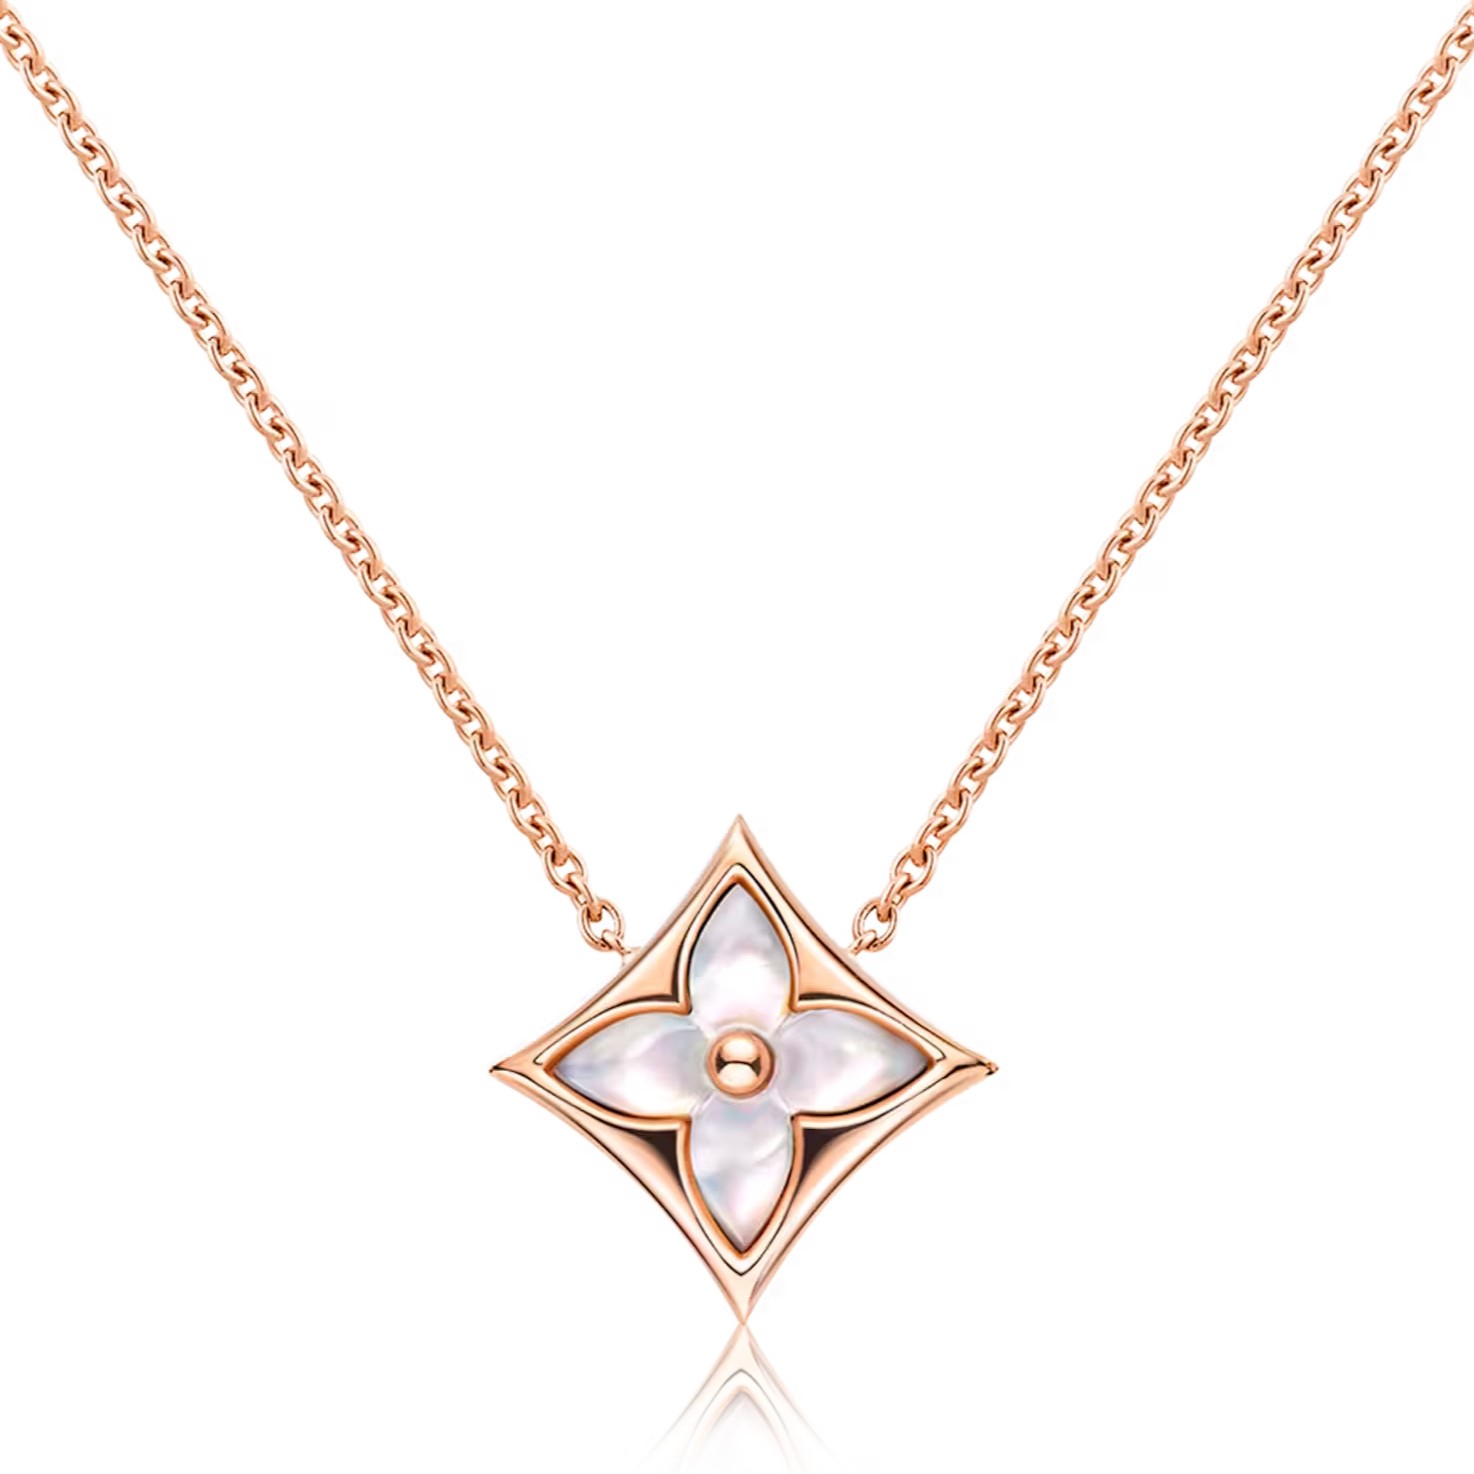 DÂY CHUYỀN THỜI TRANG LV LOUIS VUITTON COLOR BLOSSOM STAR PENDANT PINK GOLD AND WHITE MOTHER-OF-PEARL Q93521 1